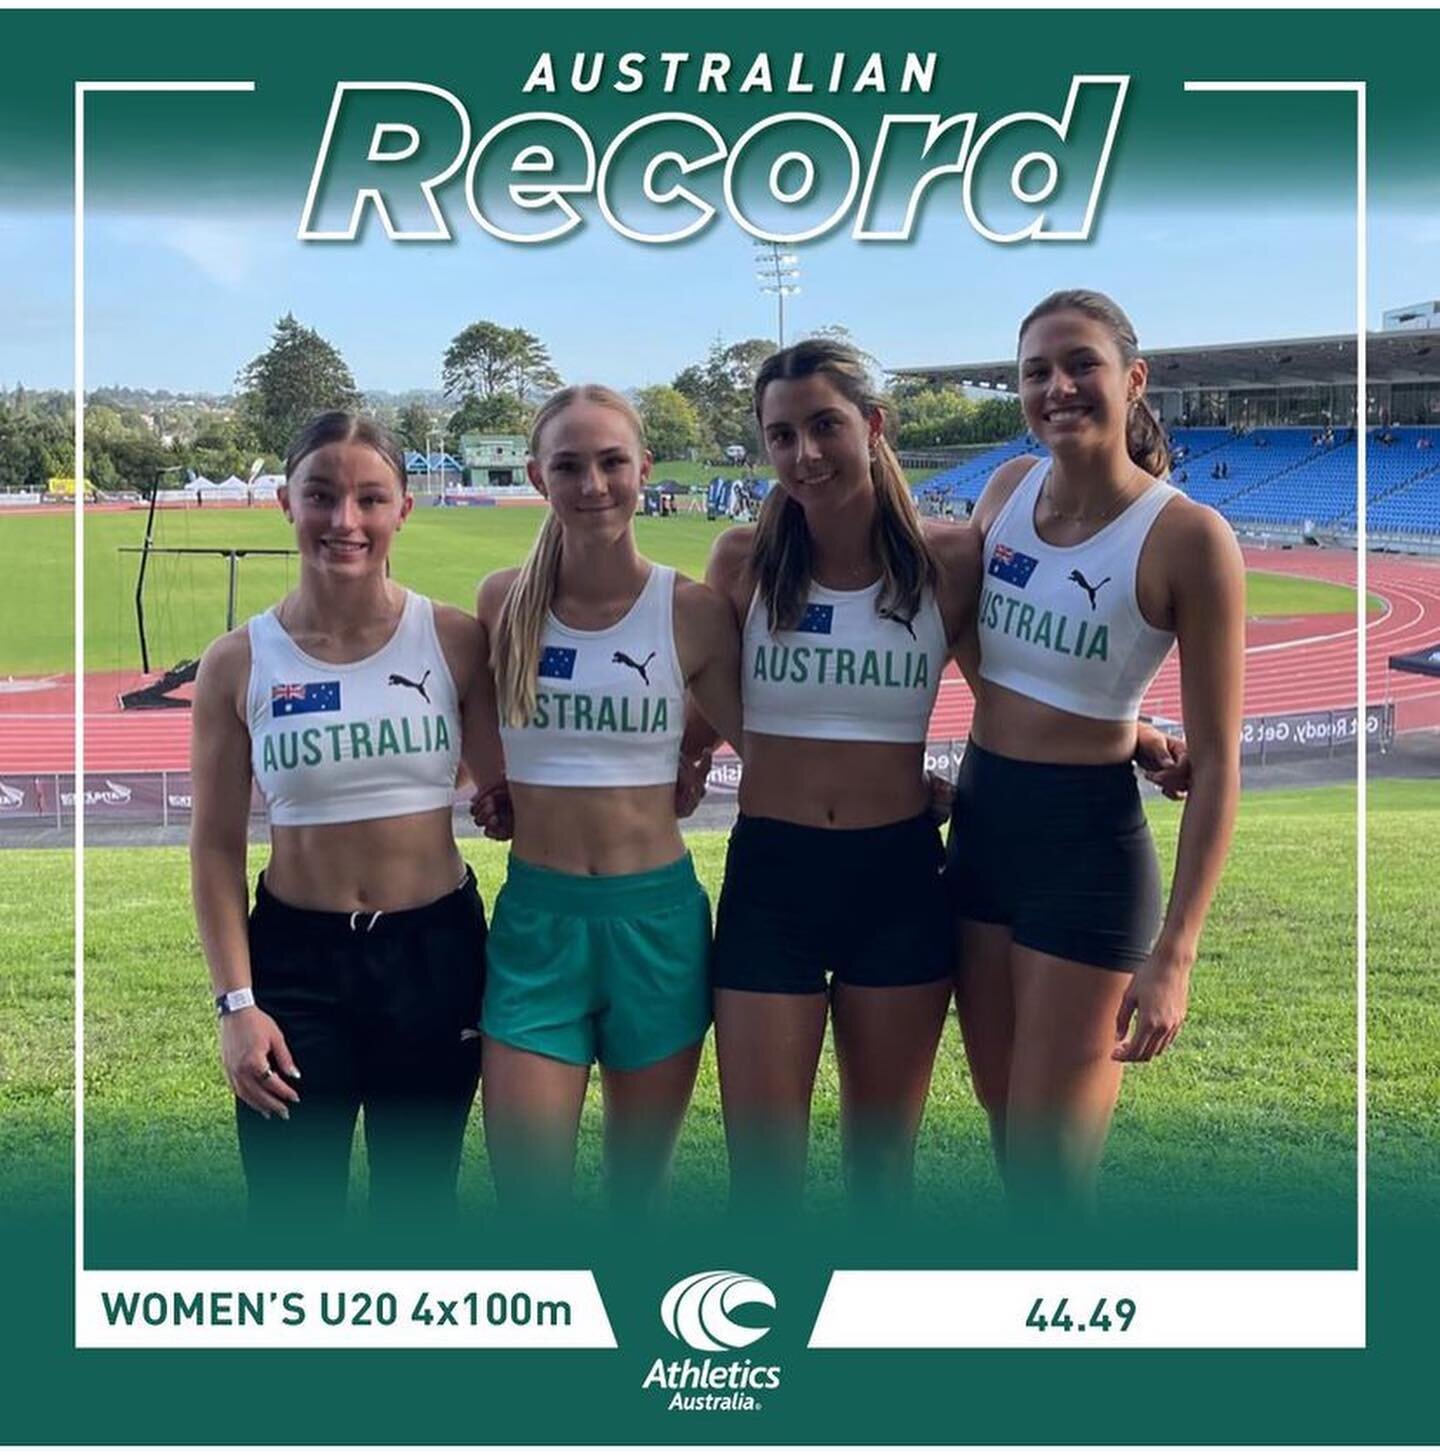 Twice in 2 weeks, the Australian U20 Women broke the National record in the 4x100m relay 🔥

Previously set in 2018, the team ran a quick 44.49 in Auckland on 10th March to break the record by 0.29, anchored home by Sandy athlete Jess Milat. 

Contin